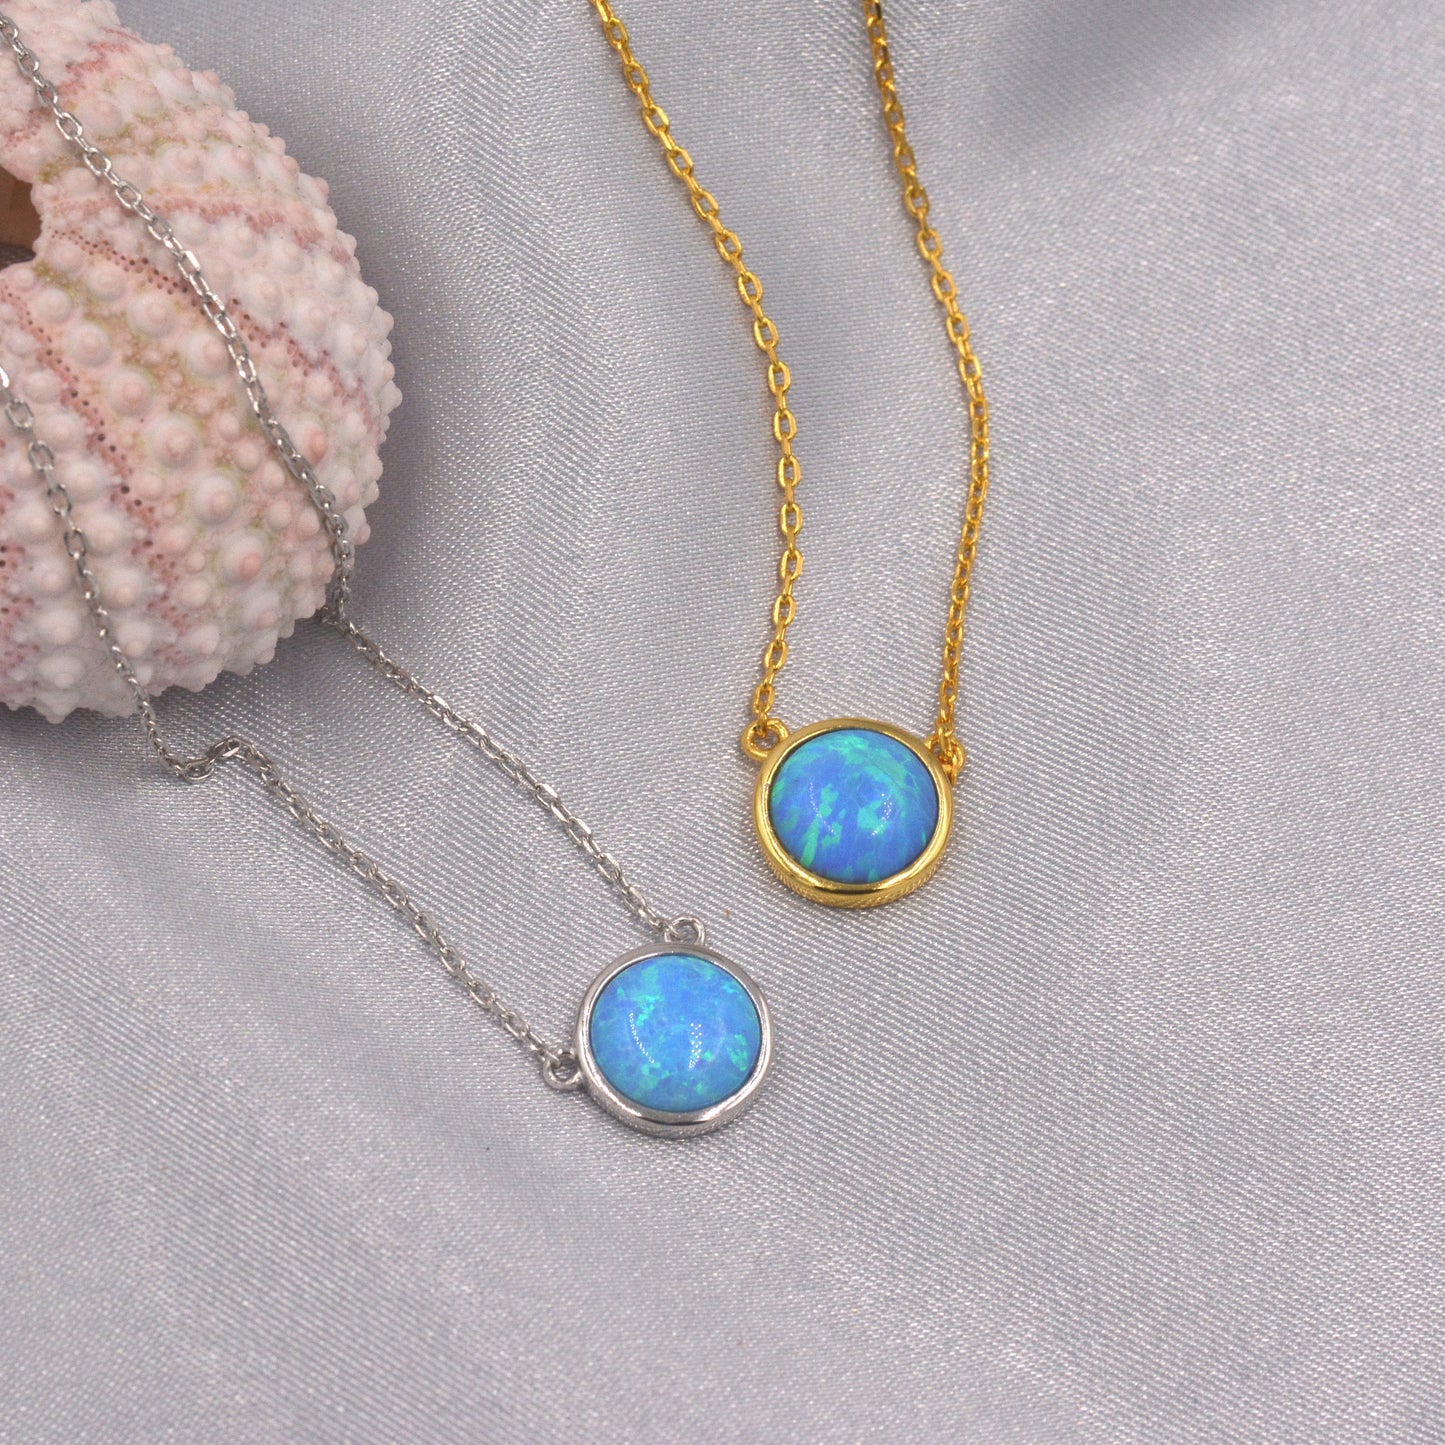 Sterling Silver Blue Opal Dainty Coin Pendant Necklace - Gold Over Sterling Silver - Delicate Crystal Coin Necklace